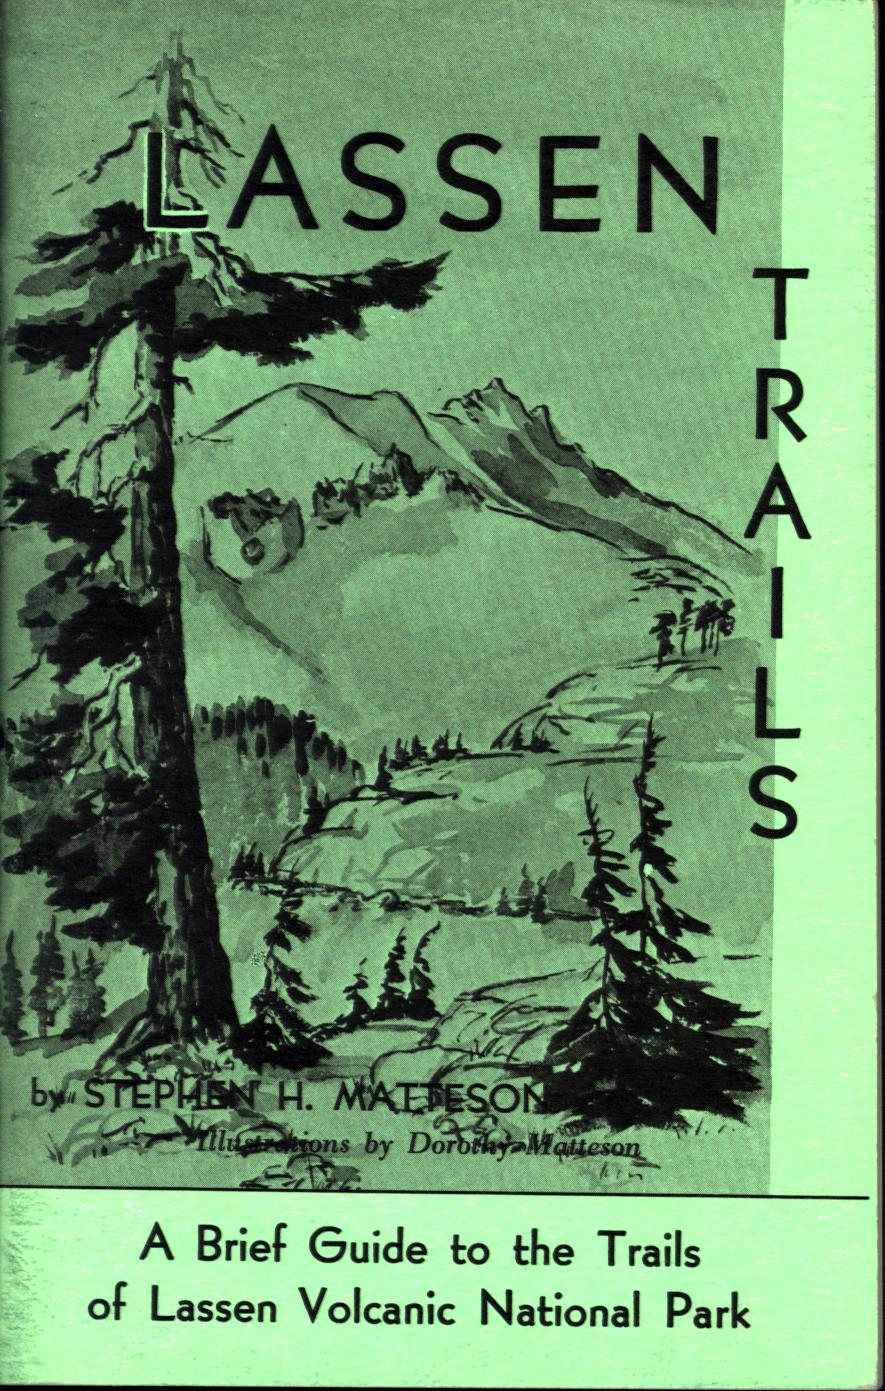 LASSEN TRAILS: a brief guide to the trails of Lassen Volcanic National Park.